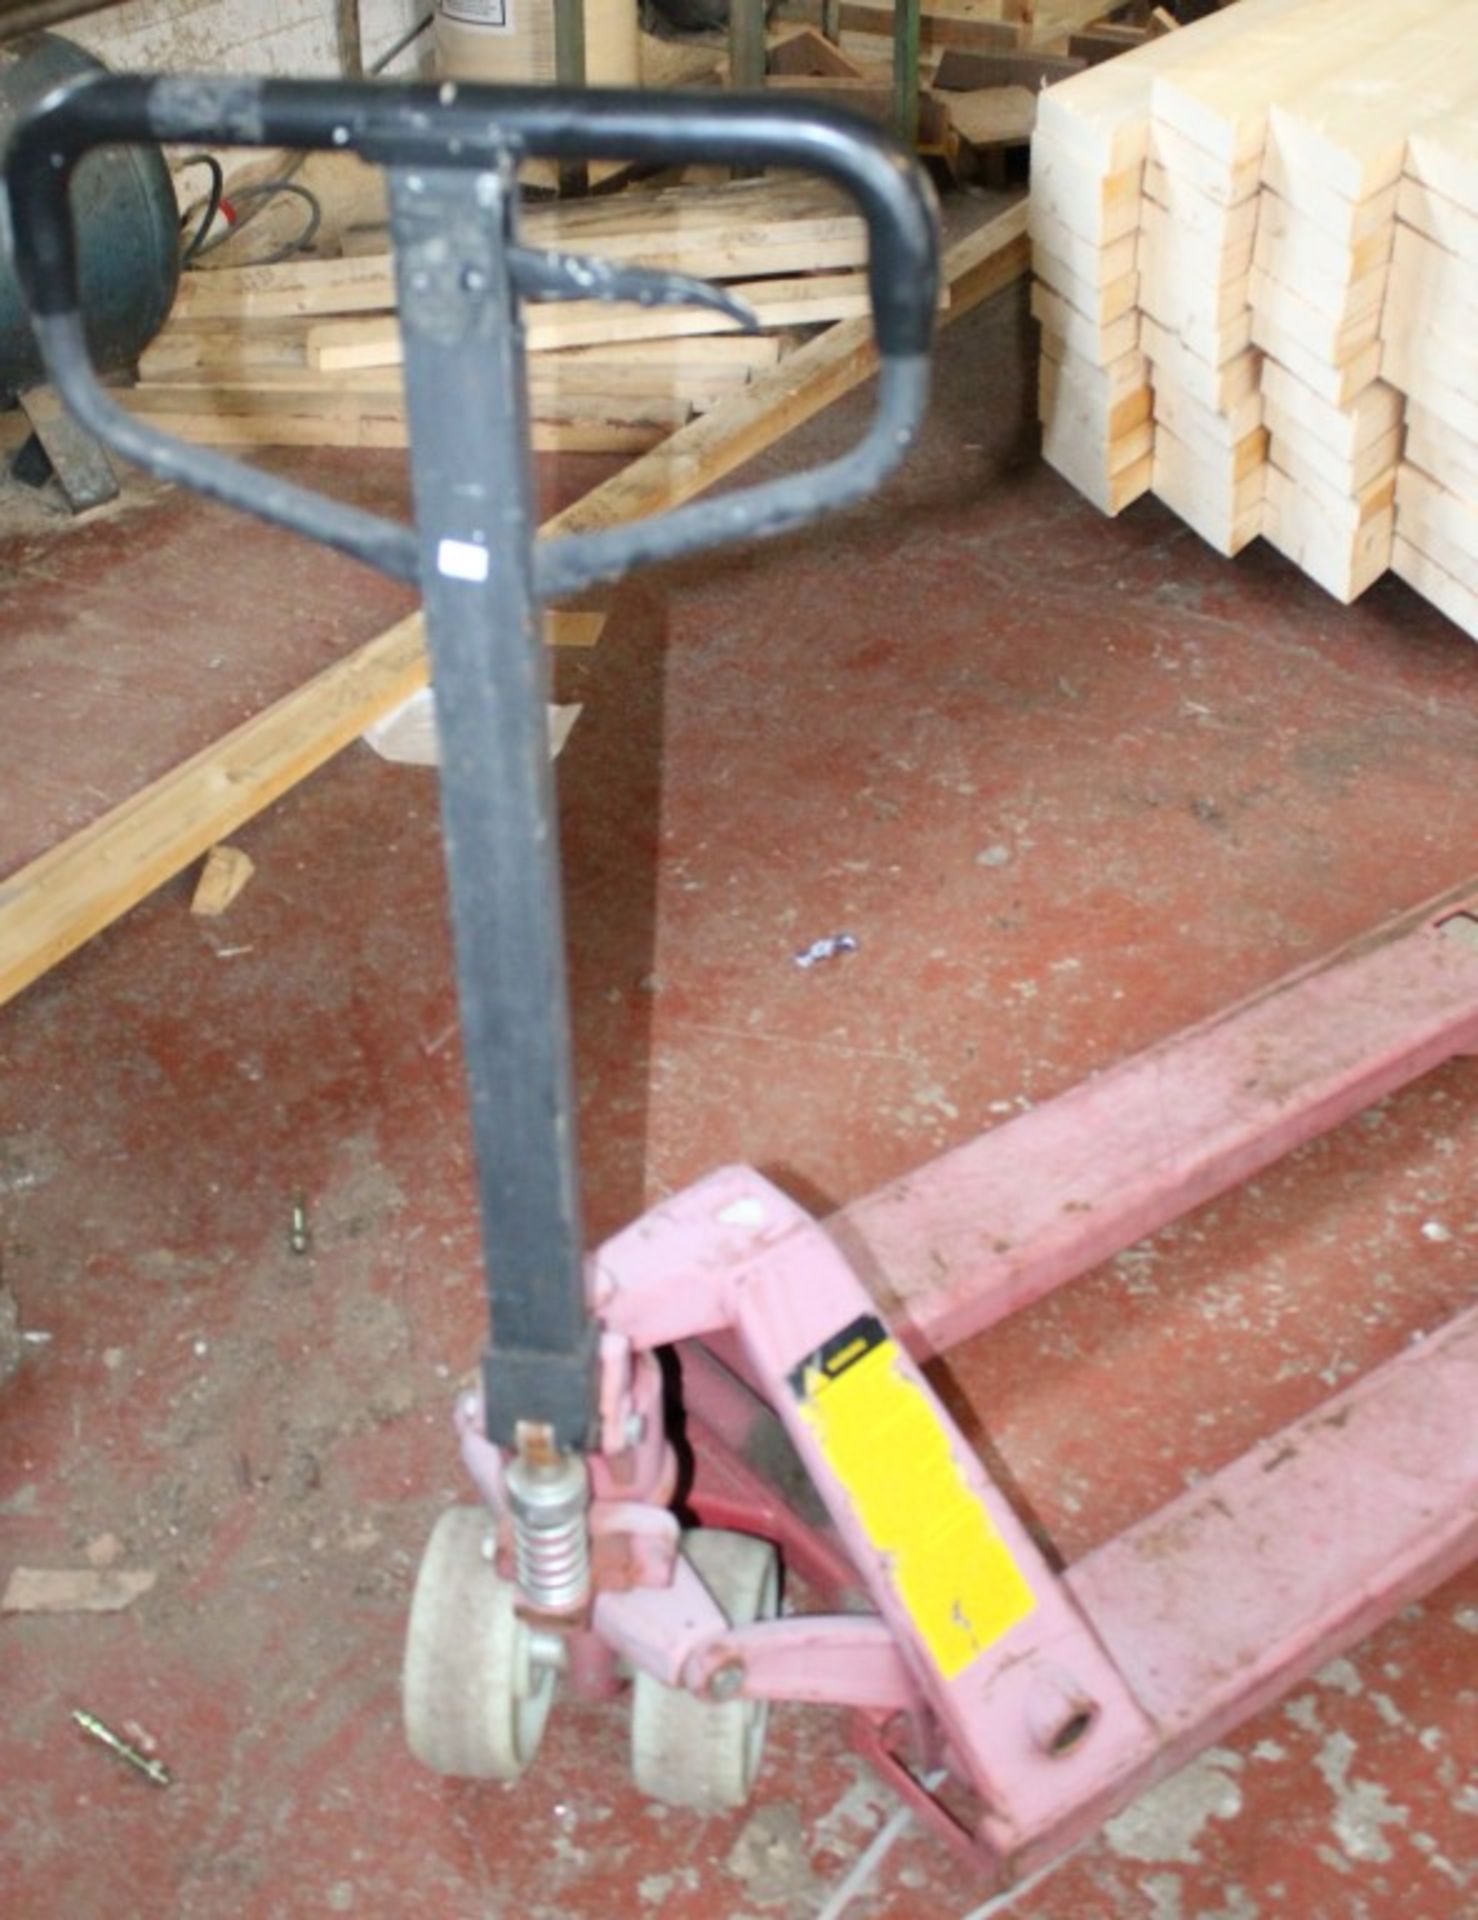 1 x Warrior Pallet Pump Truck - 2500kg Capacity - CL151 - Ref R018 - Location: Manchester - Image 2 of 3